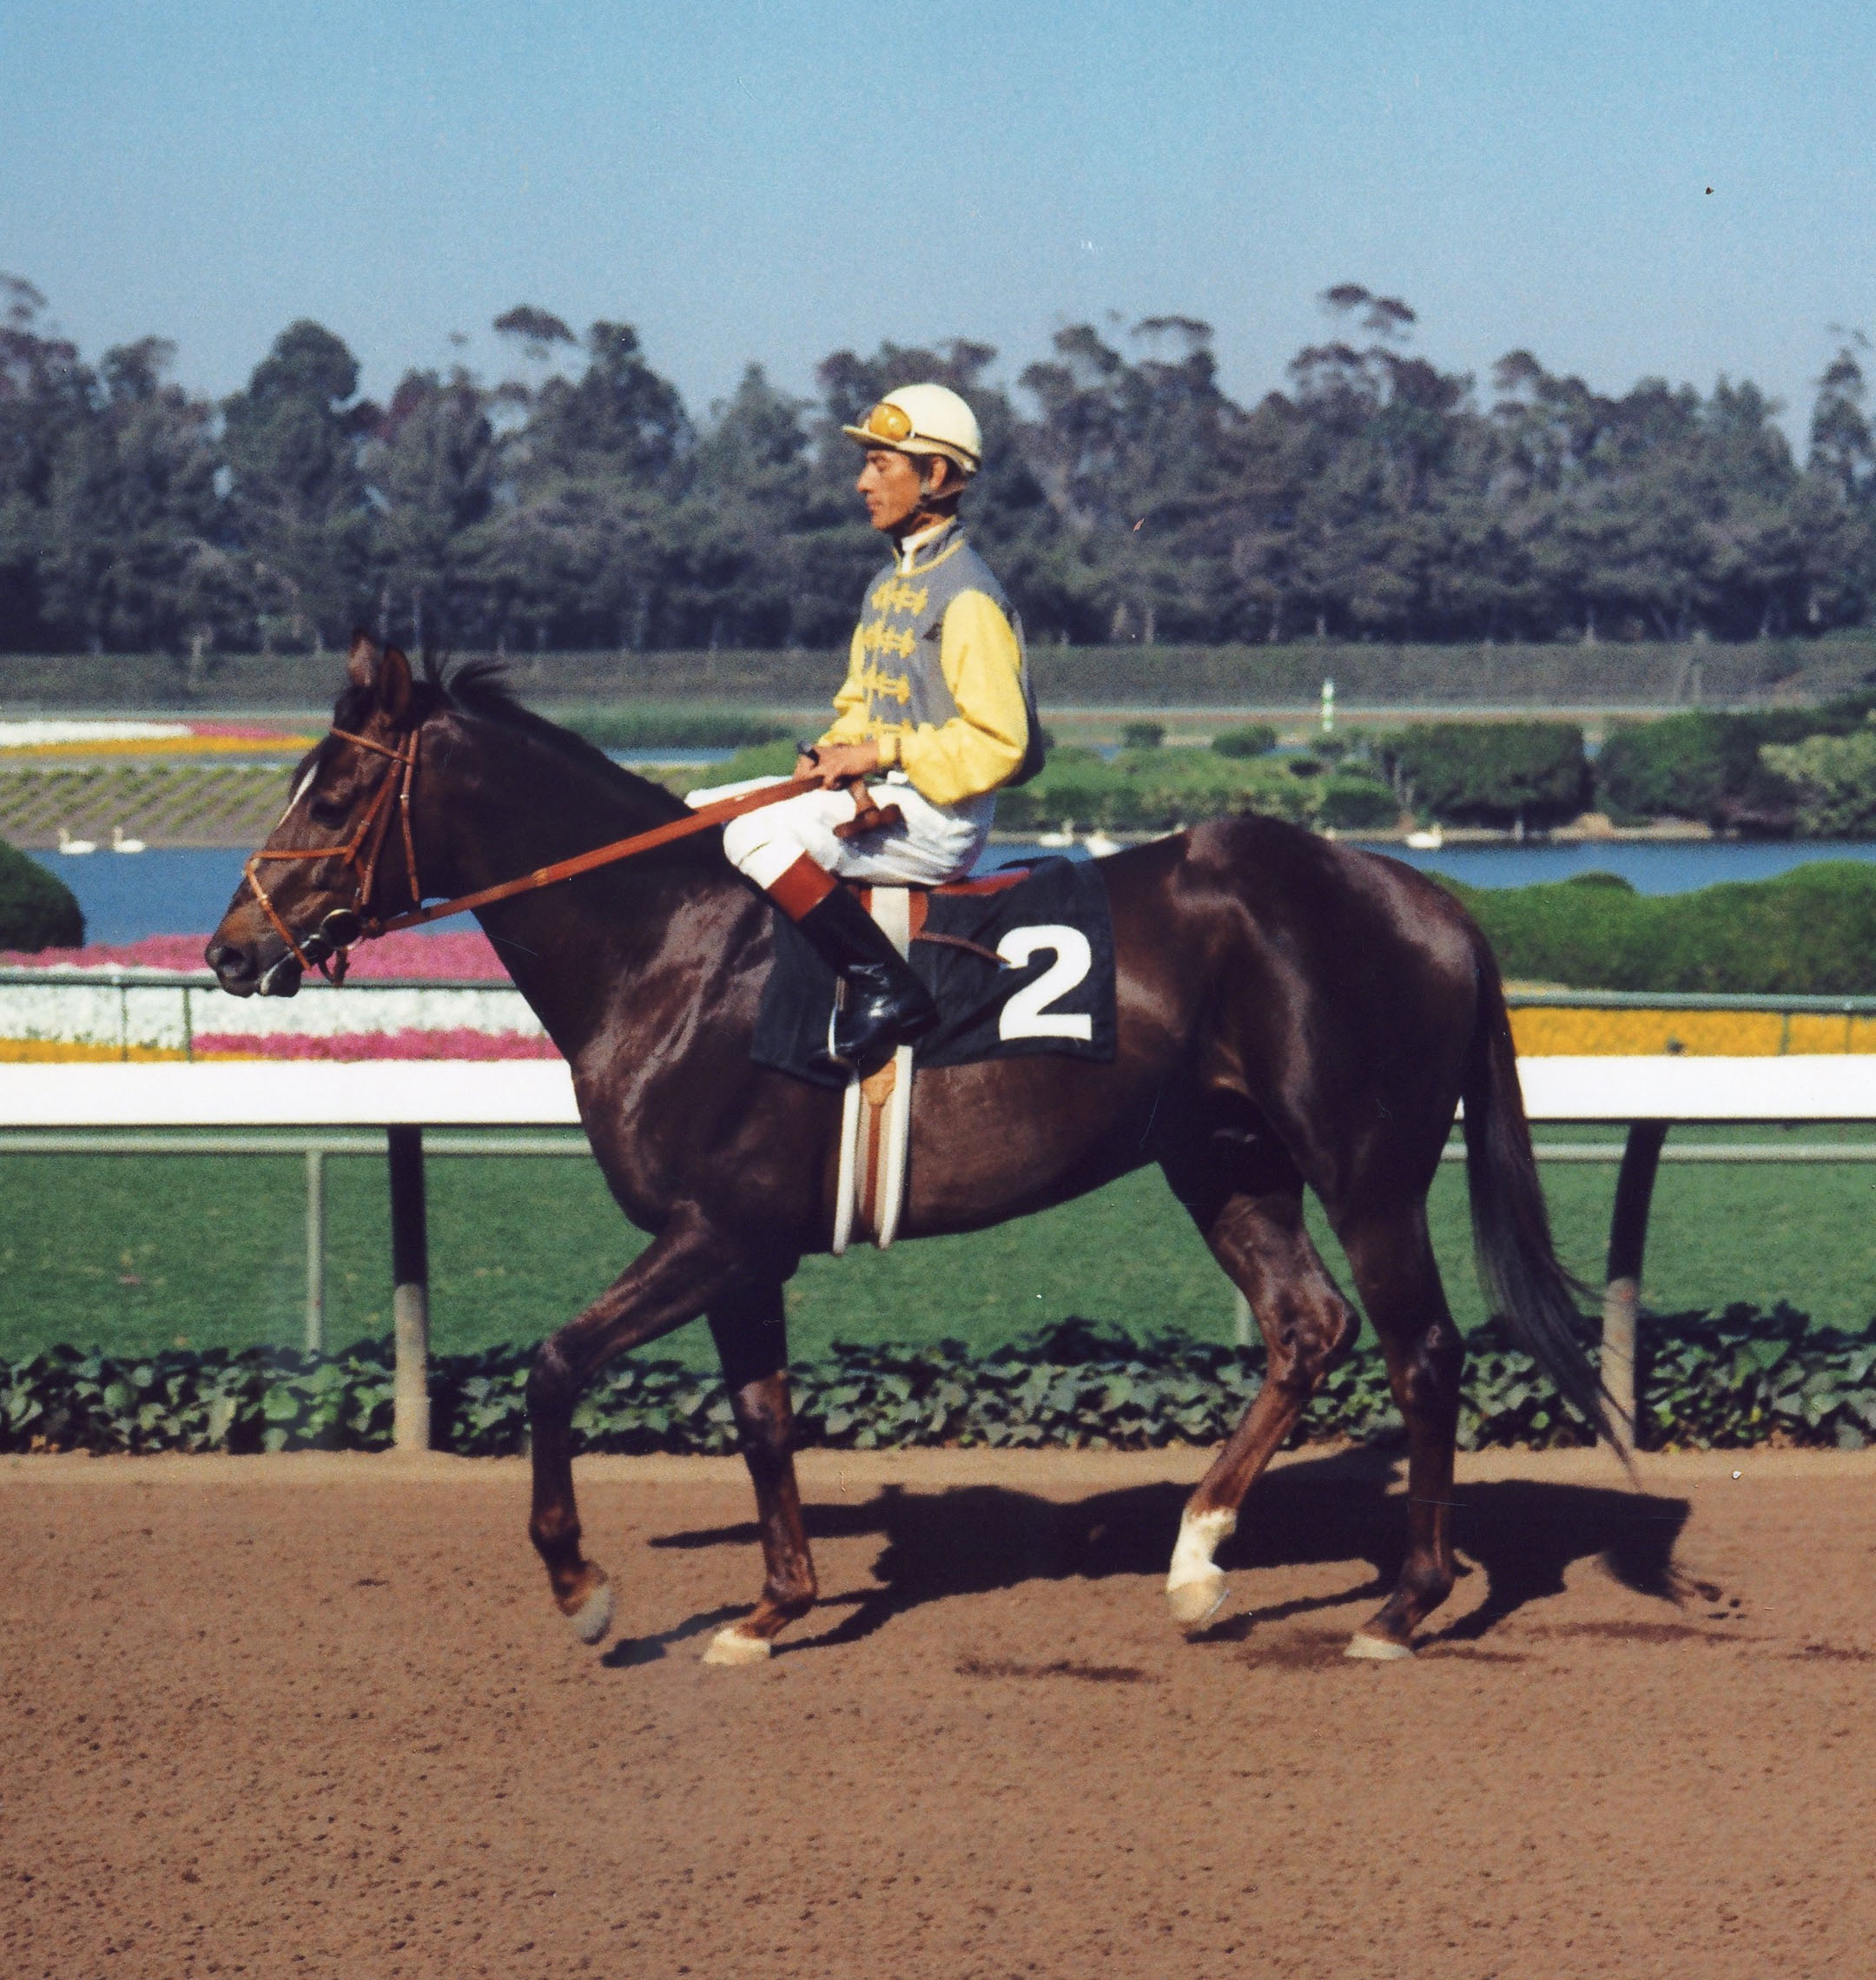 Arts and Letters (Braulio Baeza up) at Hollywood Park, 1970 (Vic Stein & Assoc./Bill Mochon Photo Collection /Museum Collection)